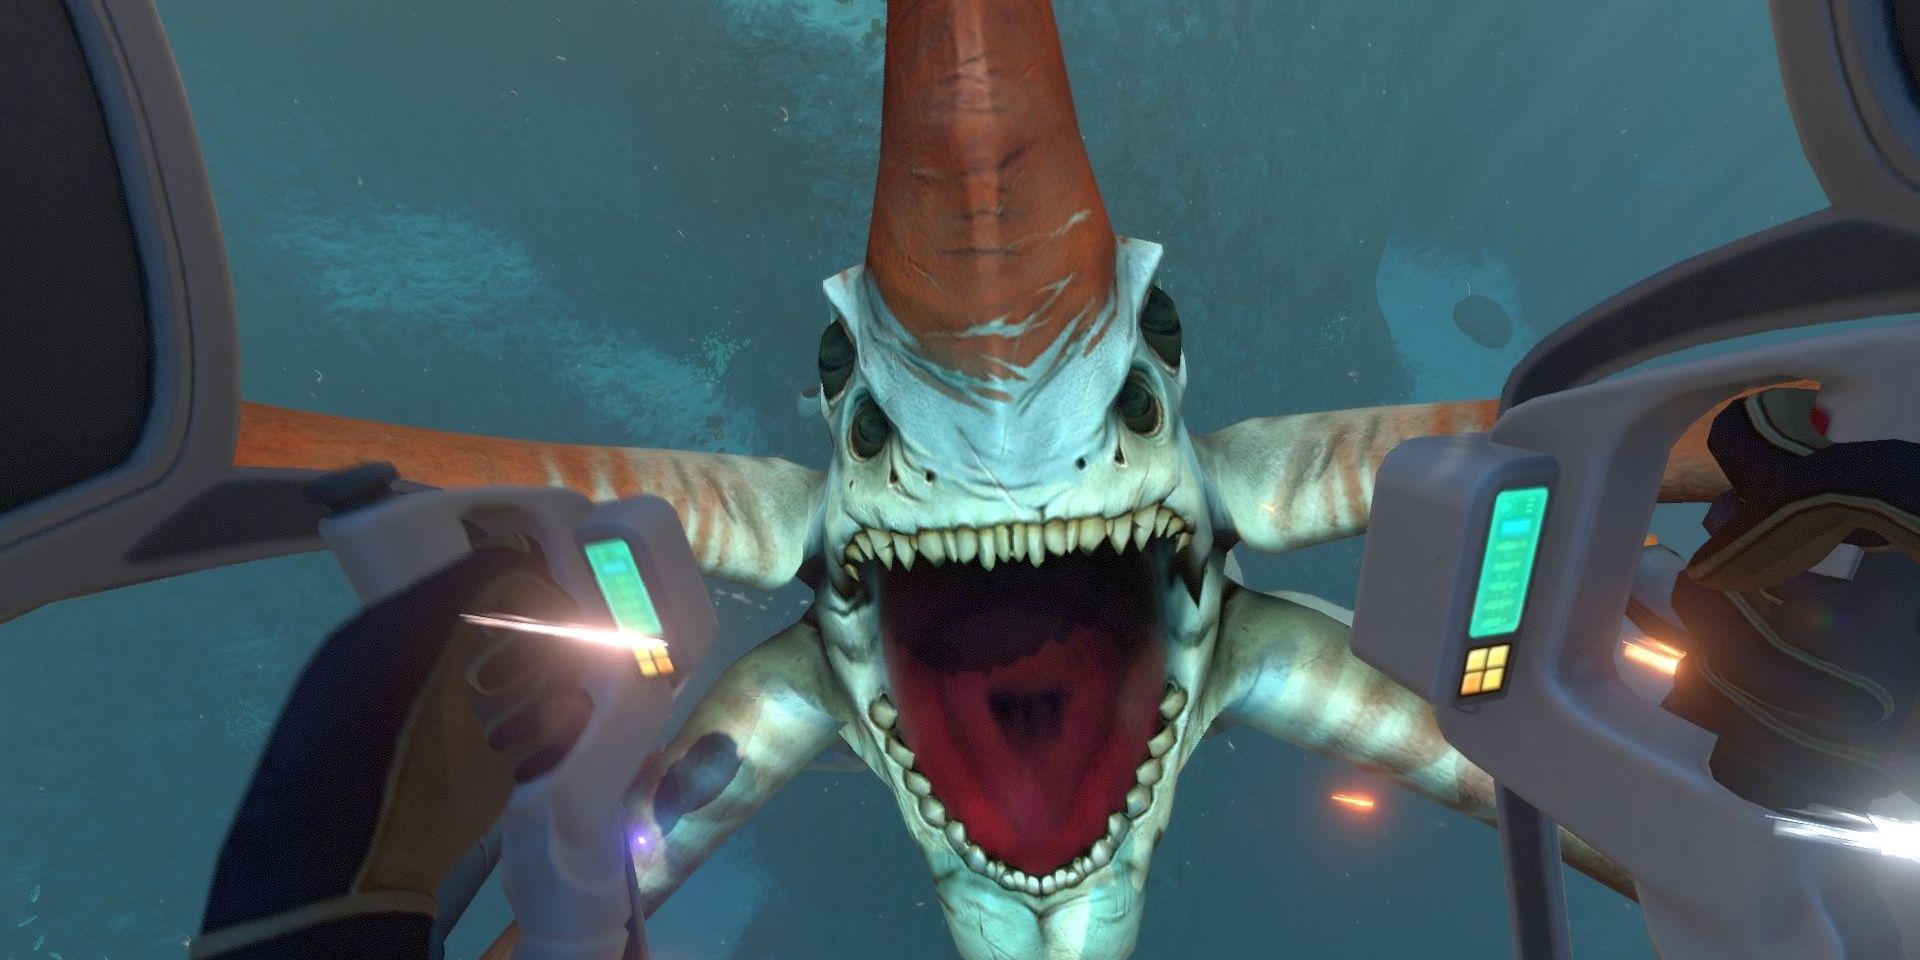 Subnautica reaper leviathan close up in prawn suit